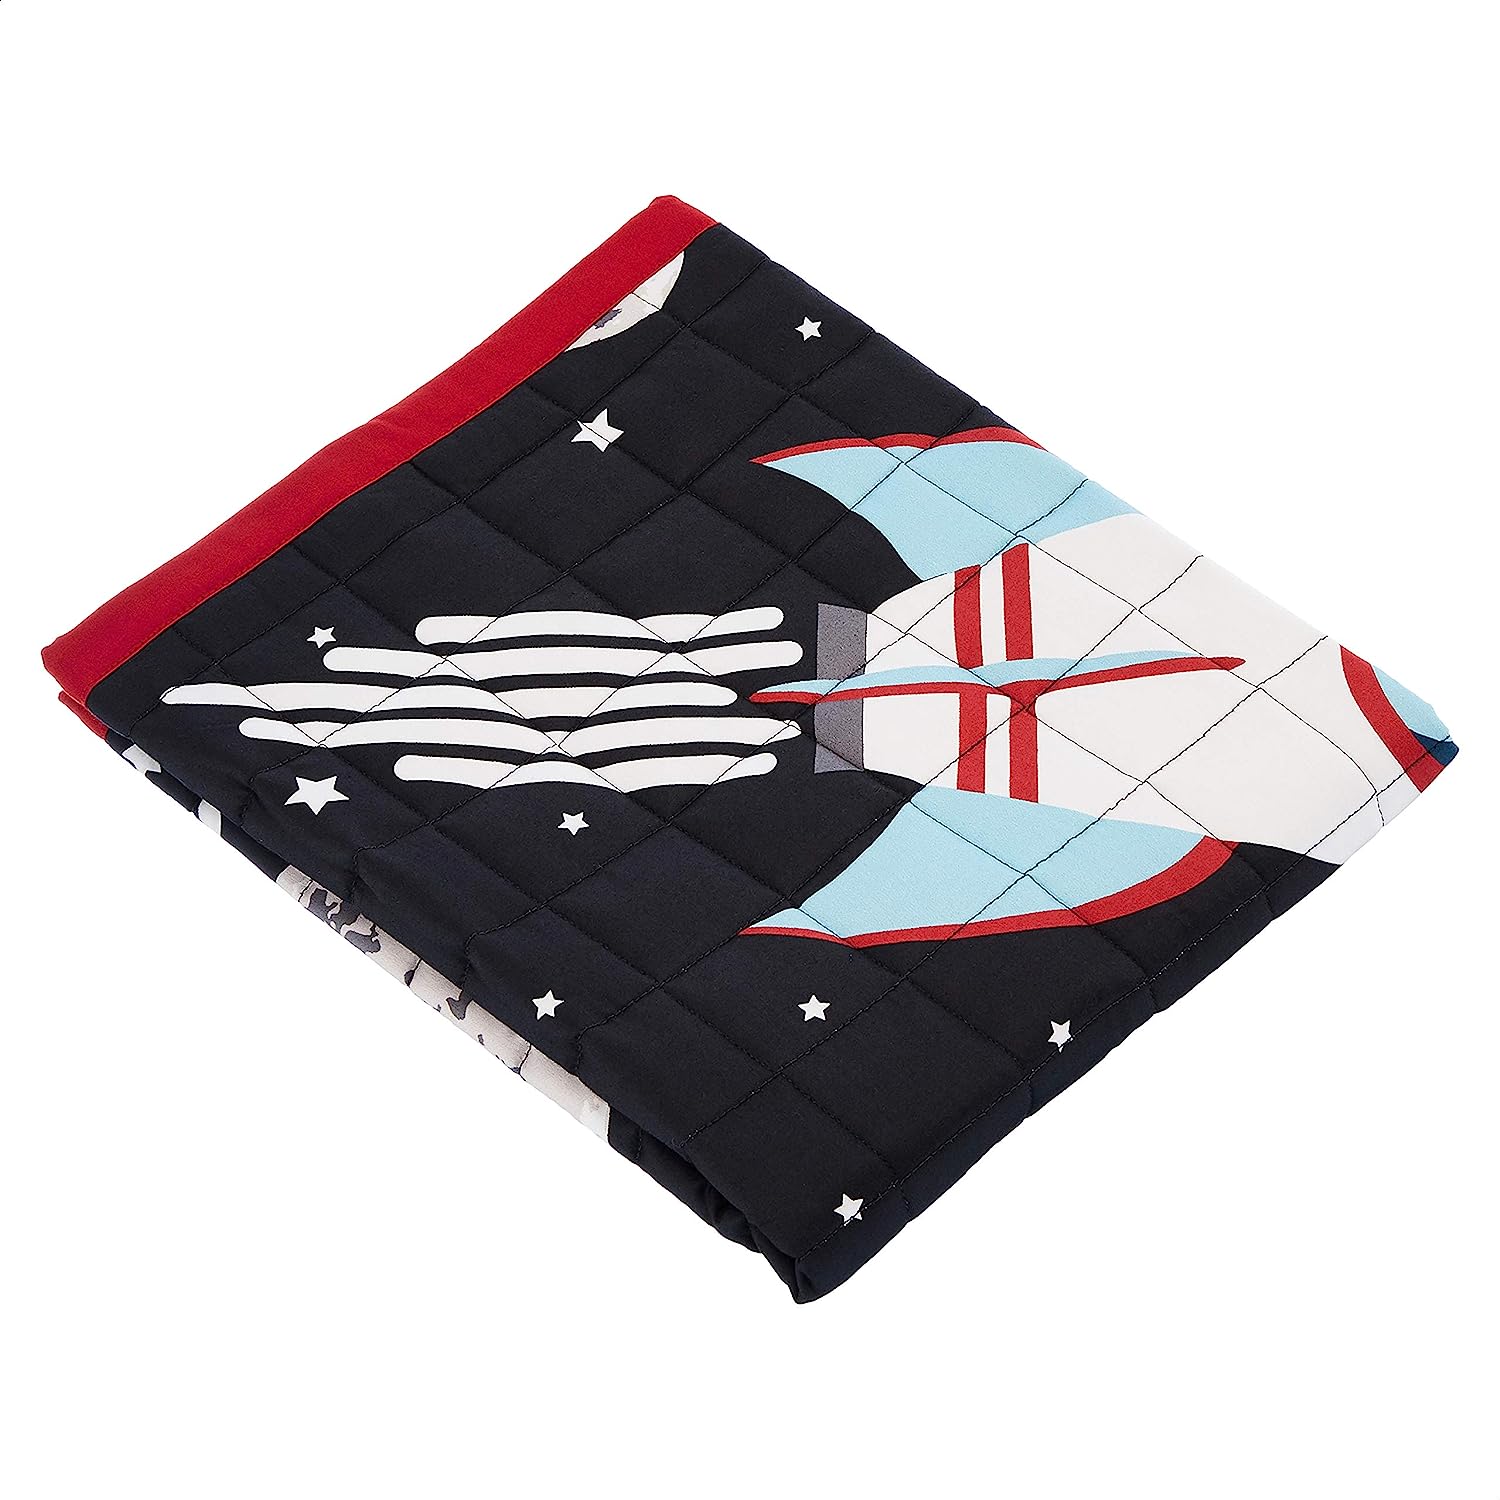 Kids Reversible Cotton Quilt Pillowcase - Flaming Red & Space Rockets